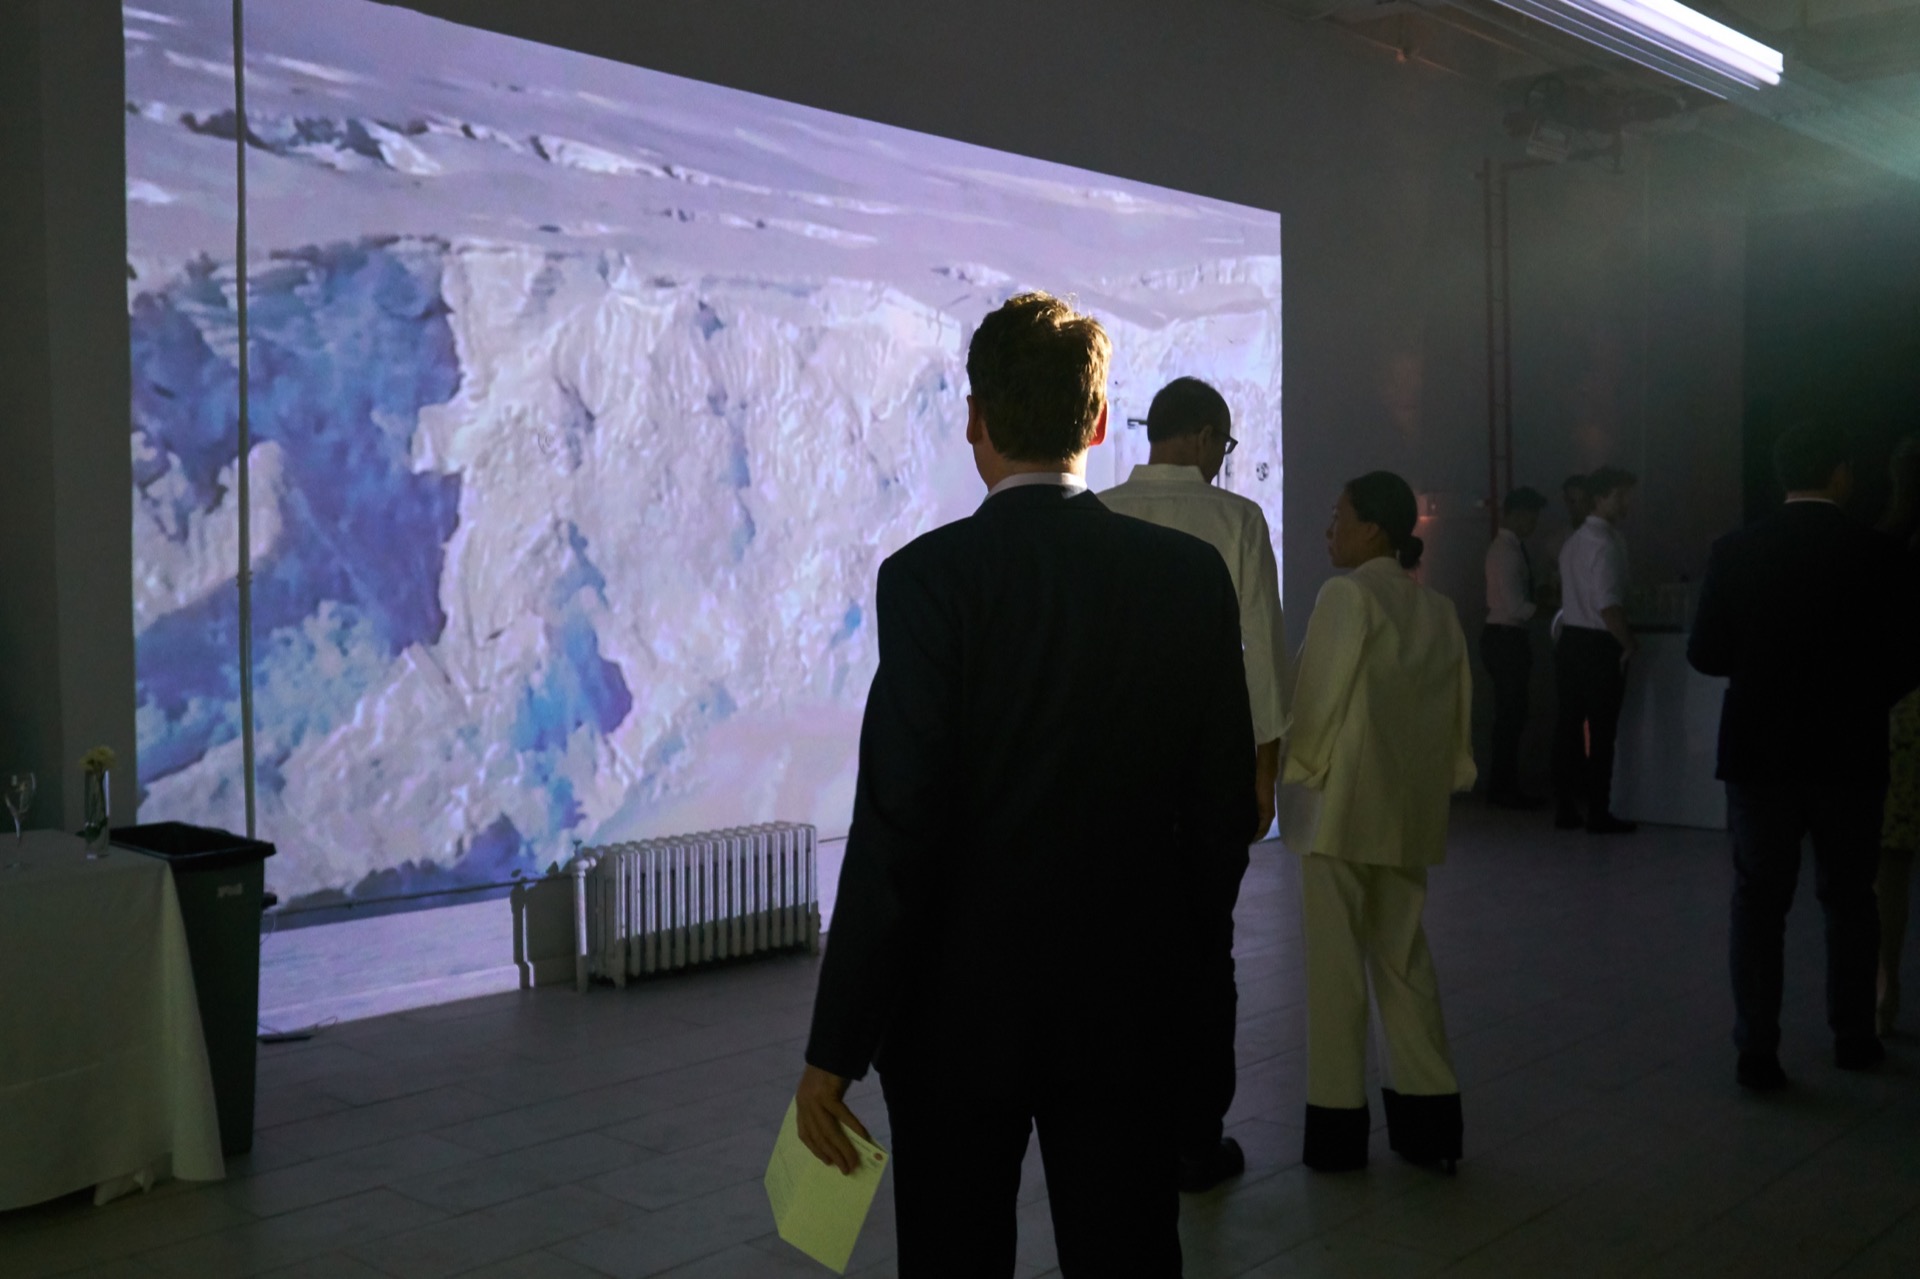 Nearly full-body photograph of a gallery-goer's back as he looks at a large wall with an image of a large glacier on it. He is holding a yellow brochure of sorts in his left hand. A few other non-descript people are also in the frame.